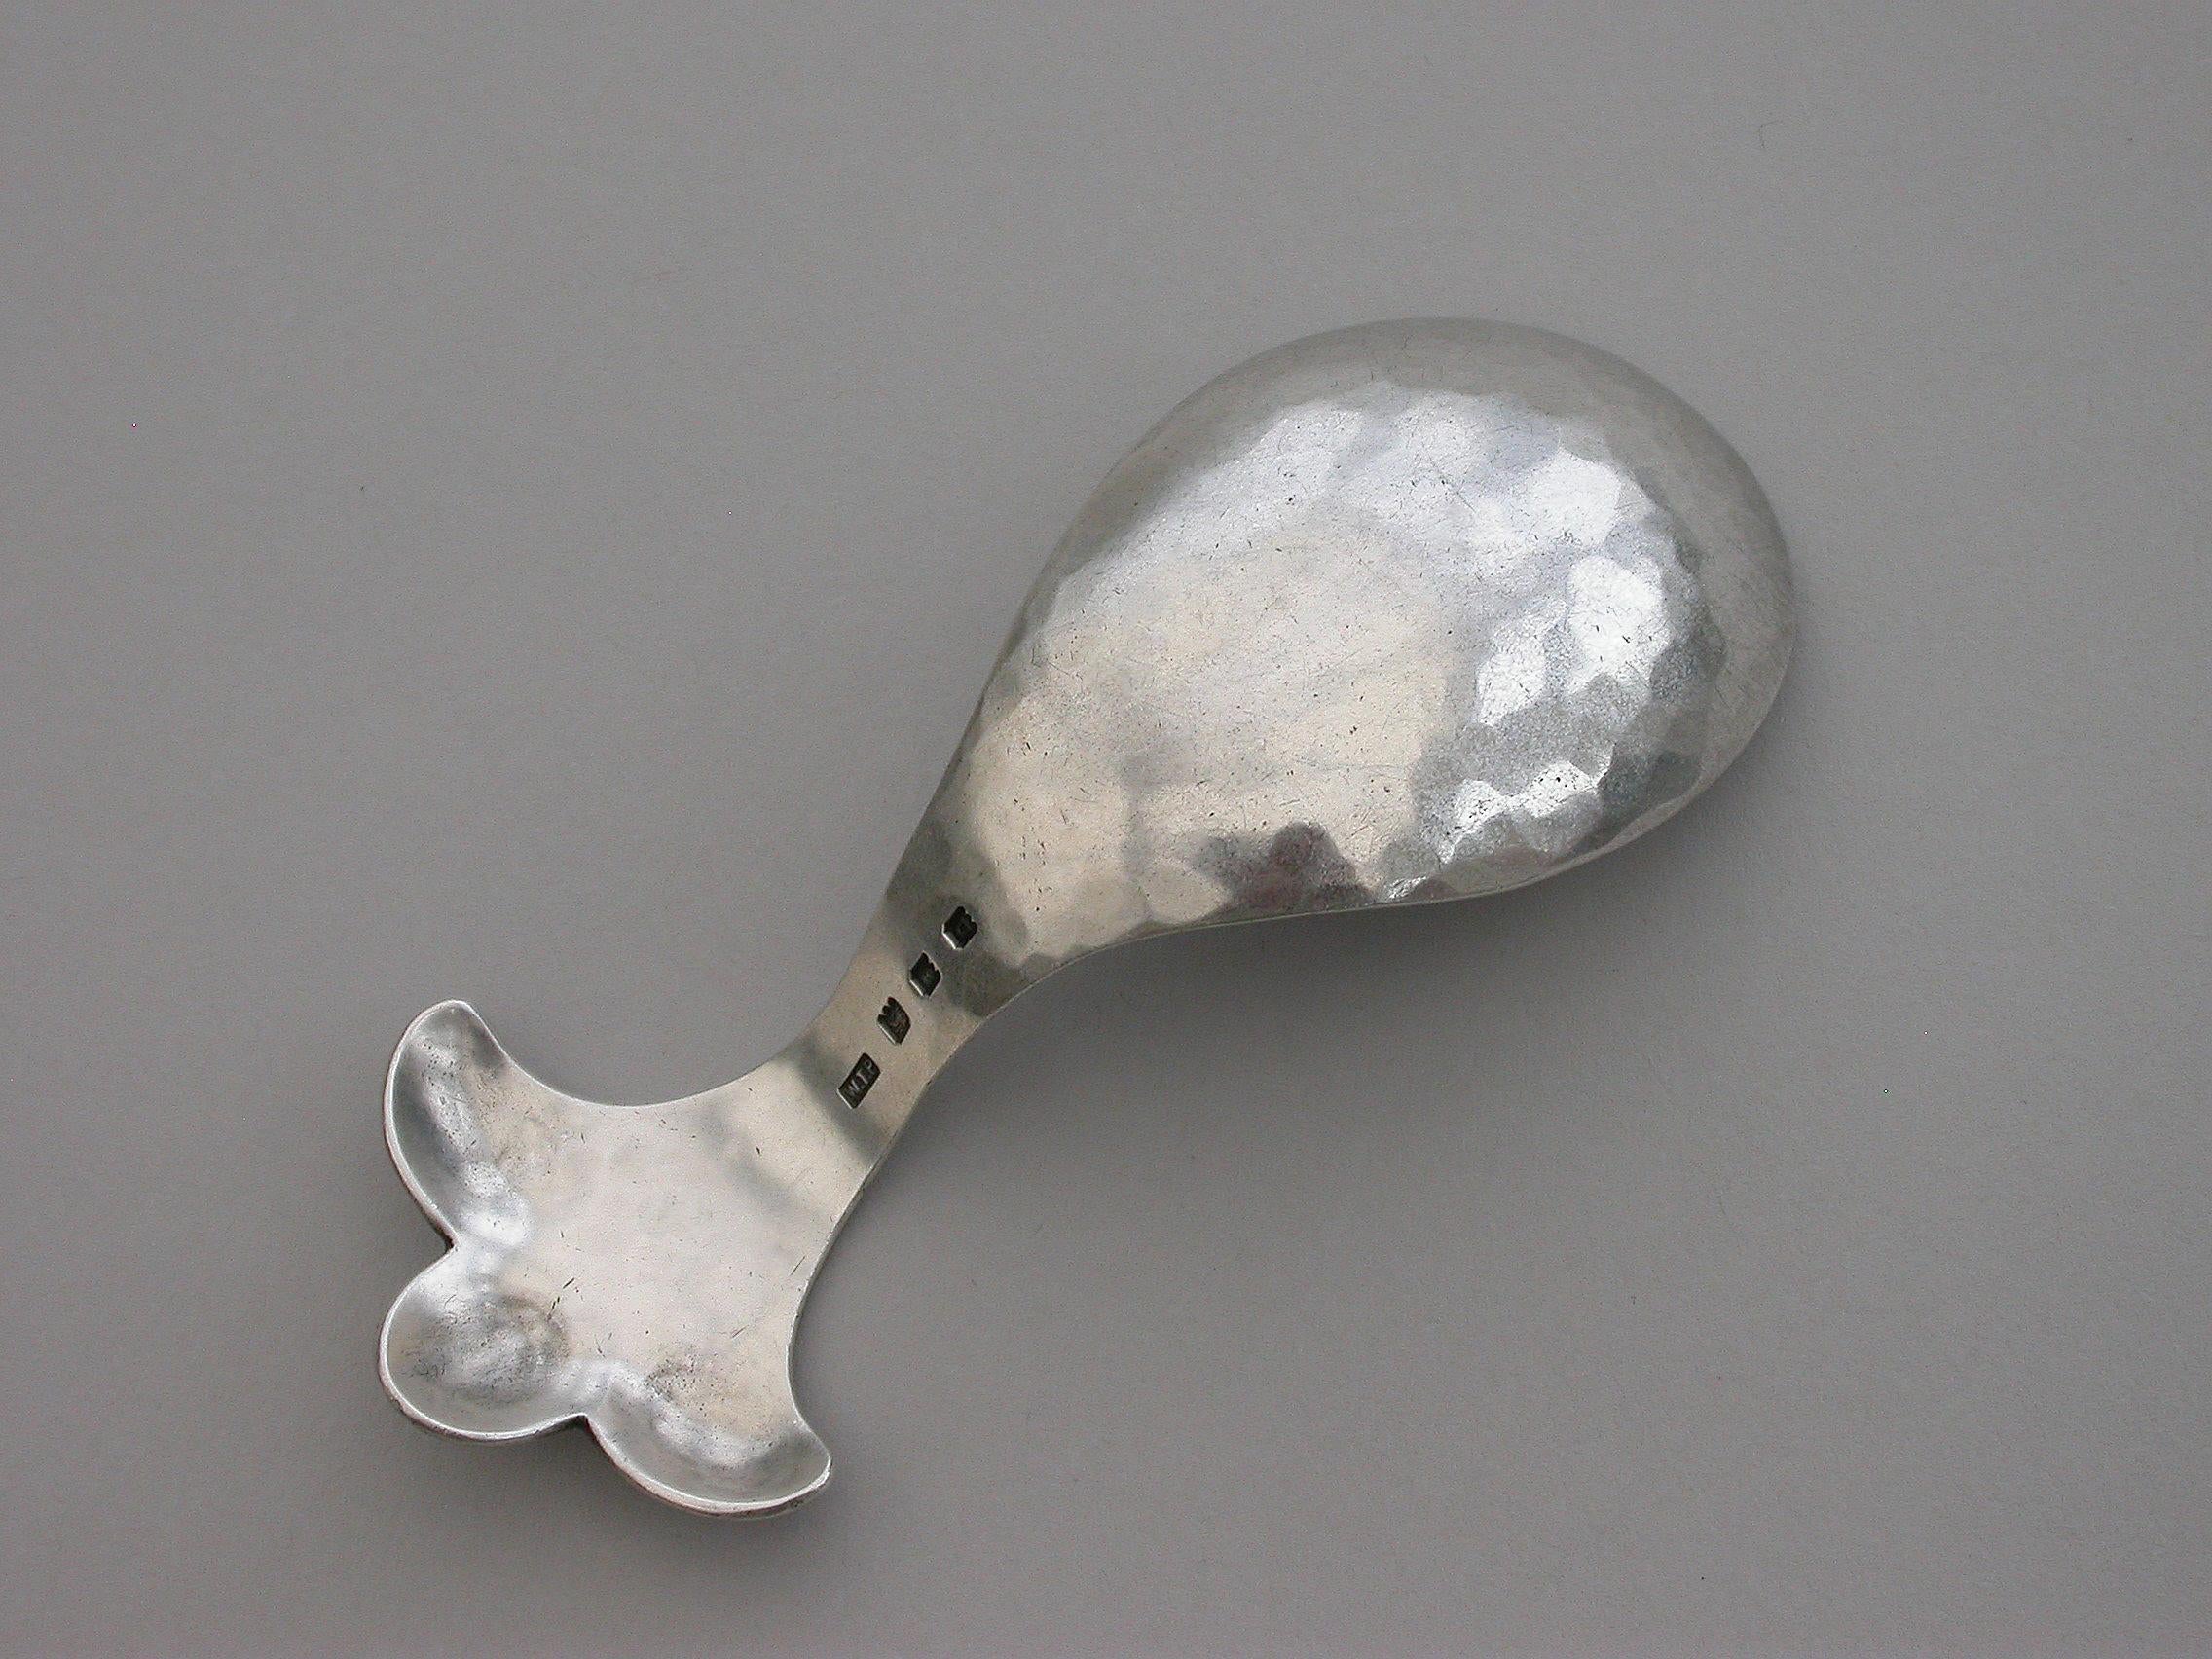 Arts & Crafts Hammered Silver Trefoil Caddy Spoon by W T Pavitt, London, 1929 In Good Condition For Sale In Sittingbourne, Kent